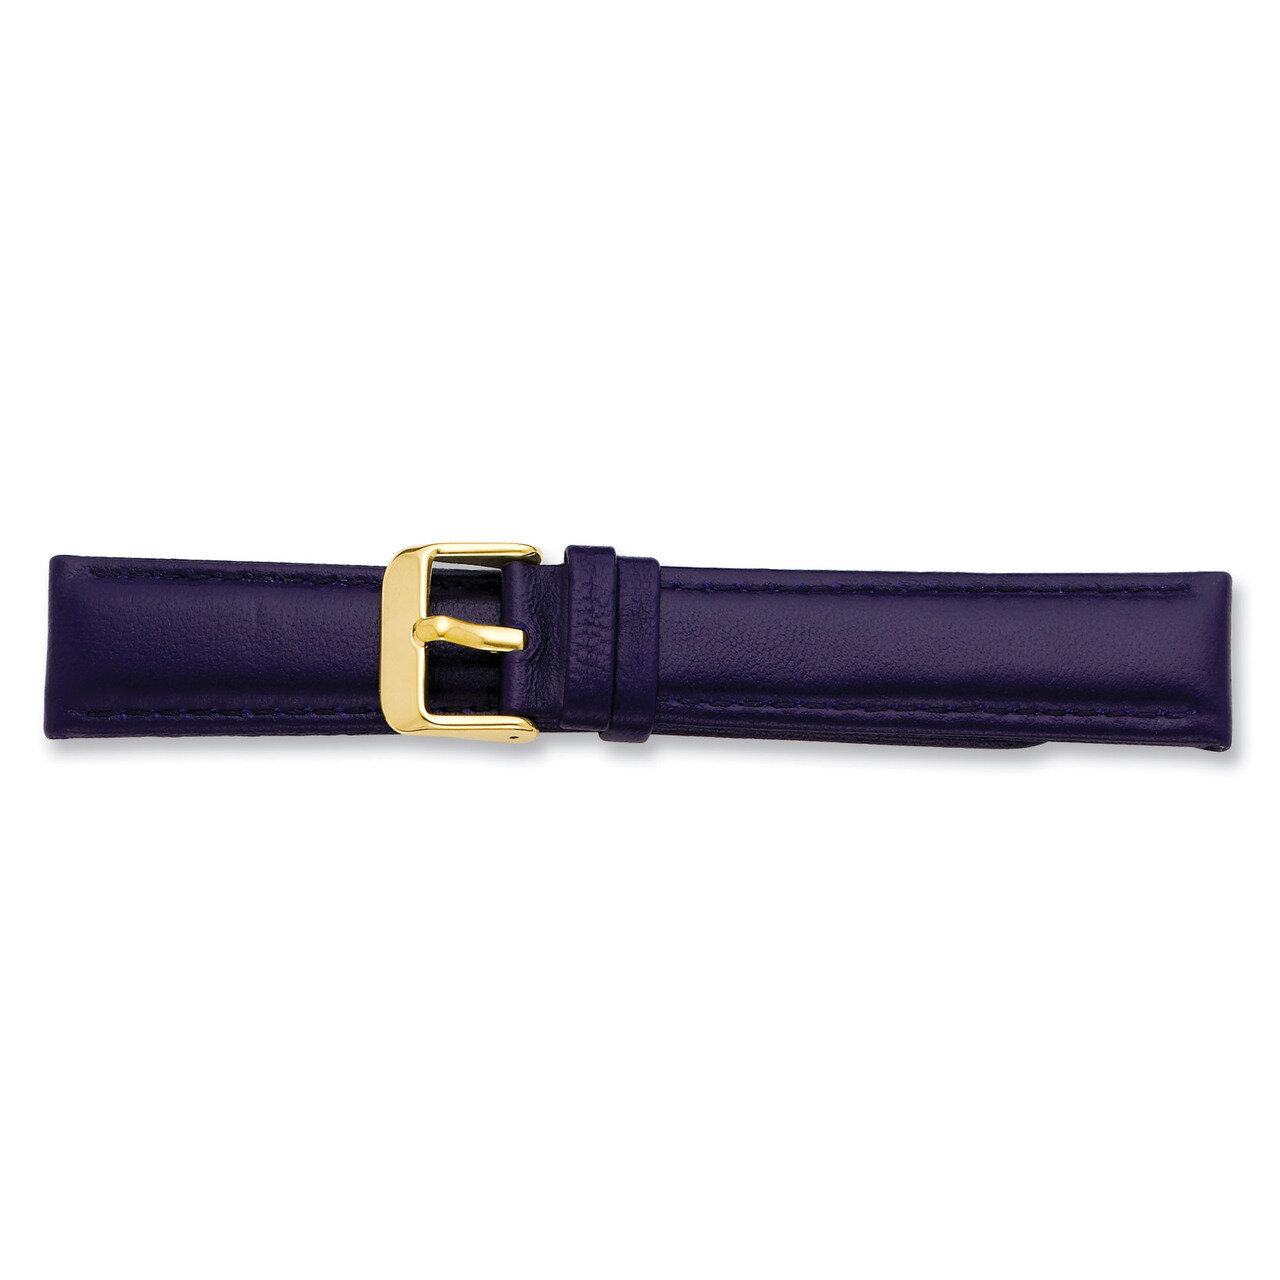 16mm Navy Glove Leather Buckle Watch Band 7.75 Inch Gold-tone BA198-16